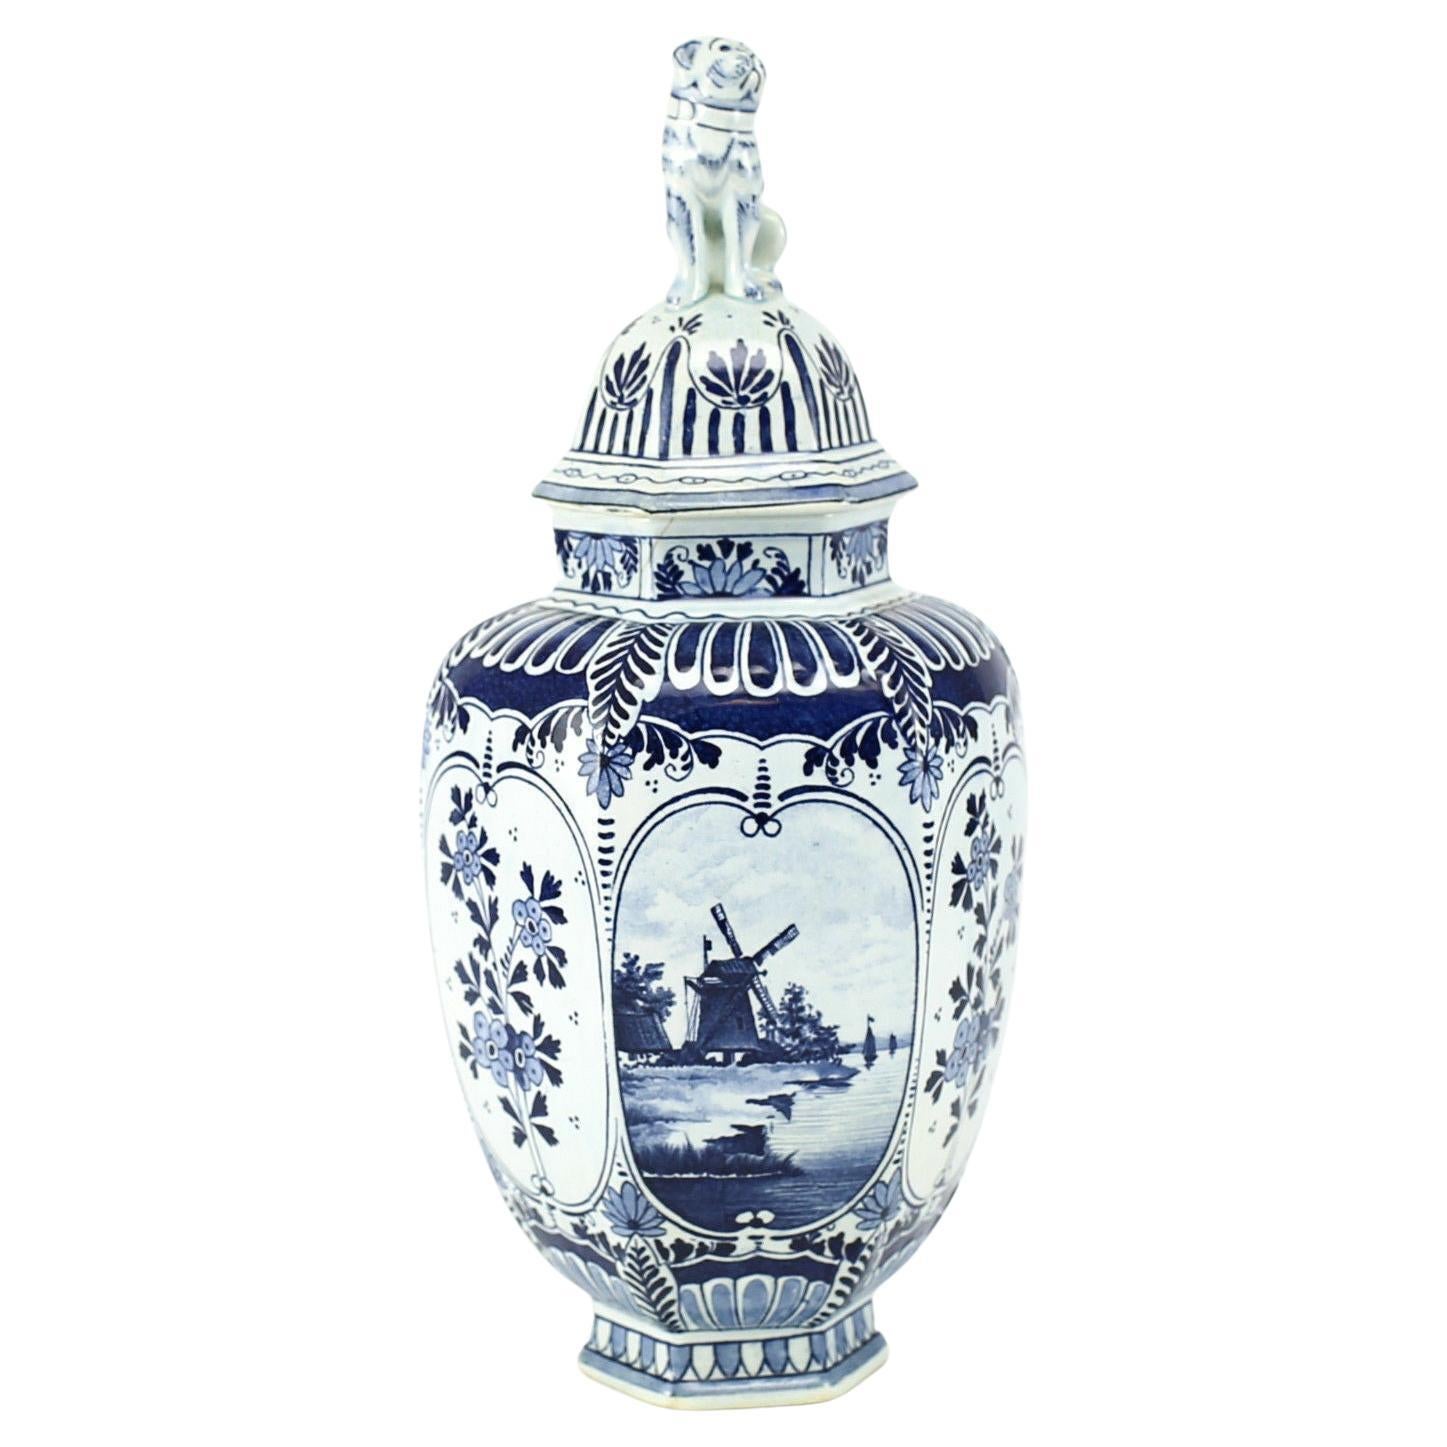 Royal Sphinx Delft Hand Painted Pottery Urn with Cat Finial, 19th Century